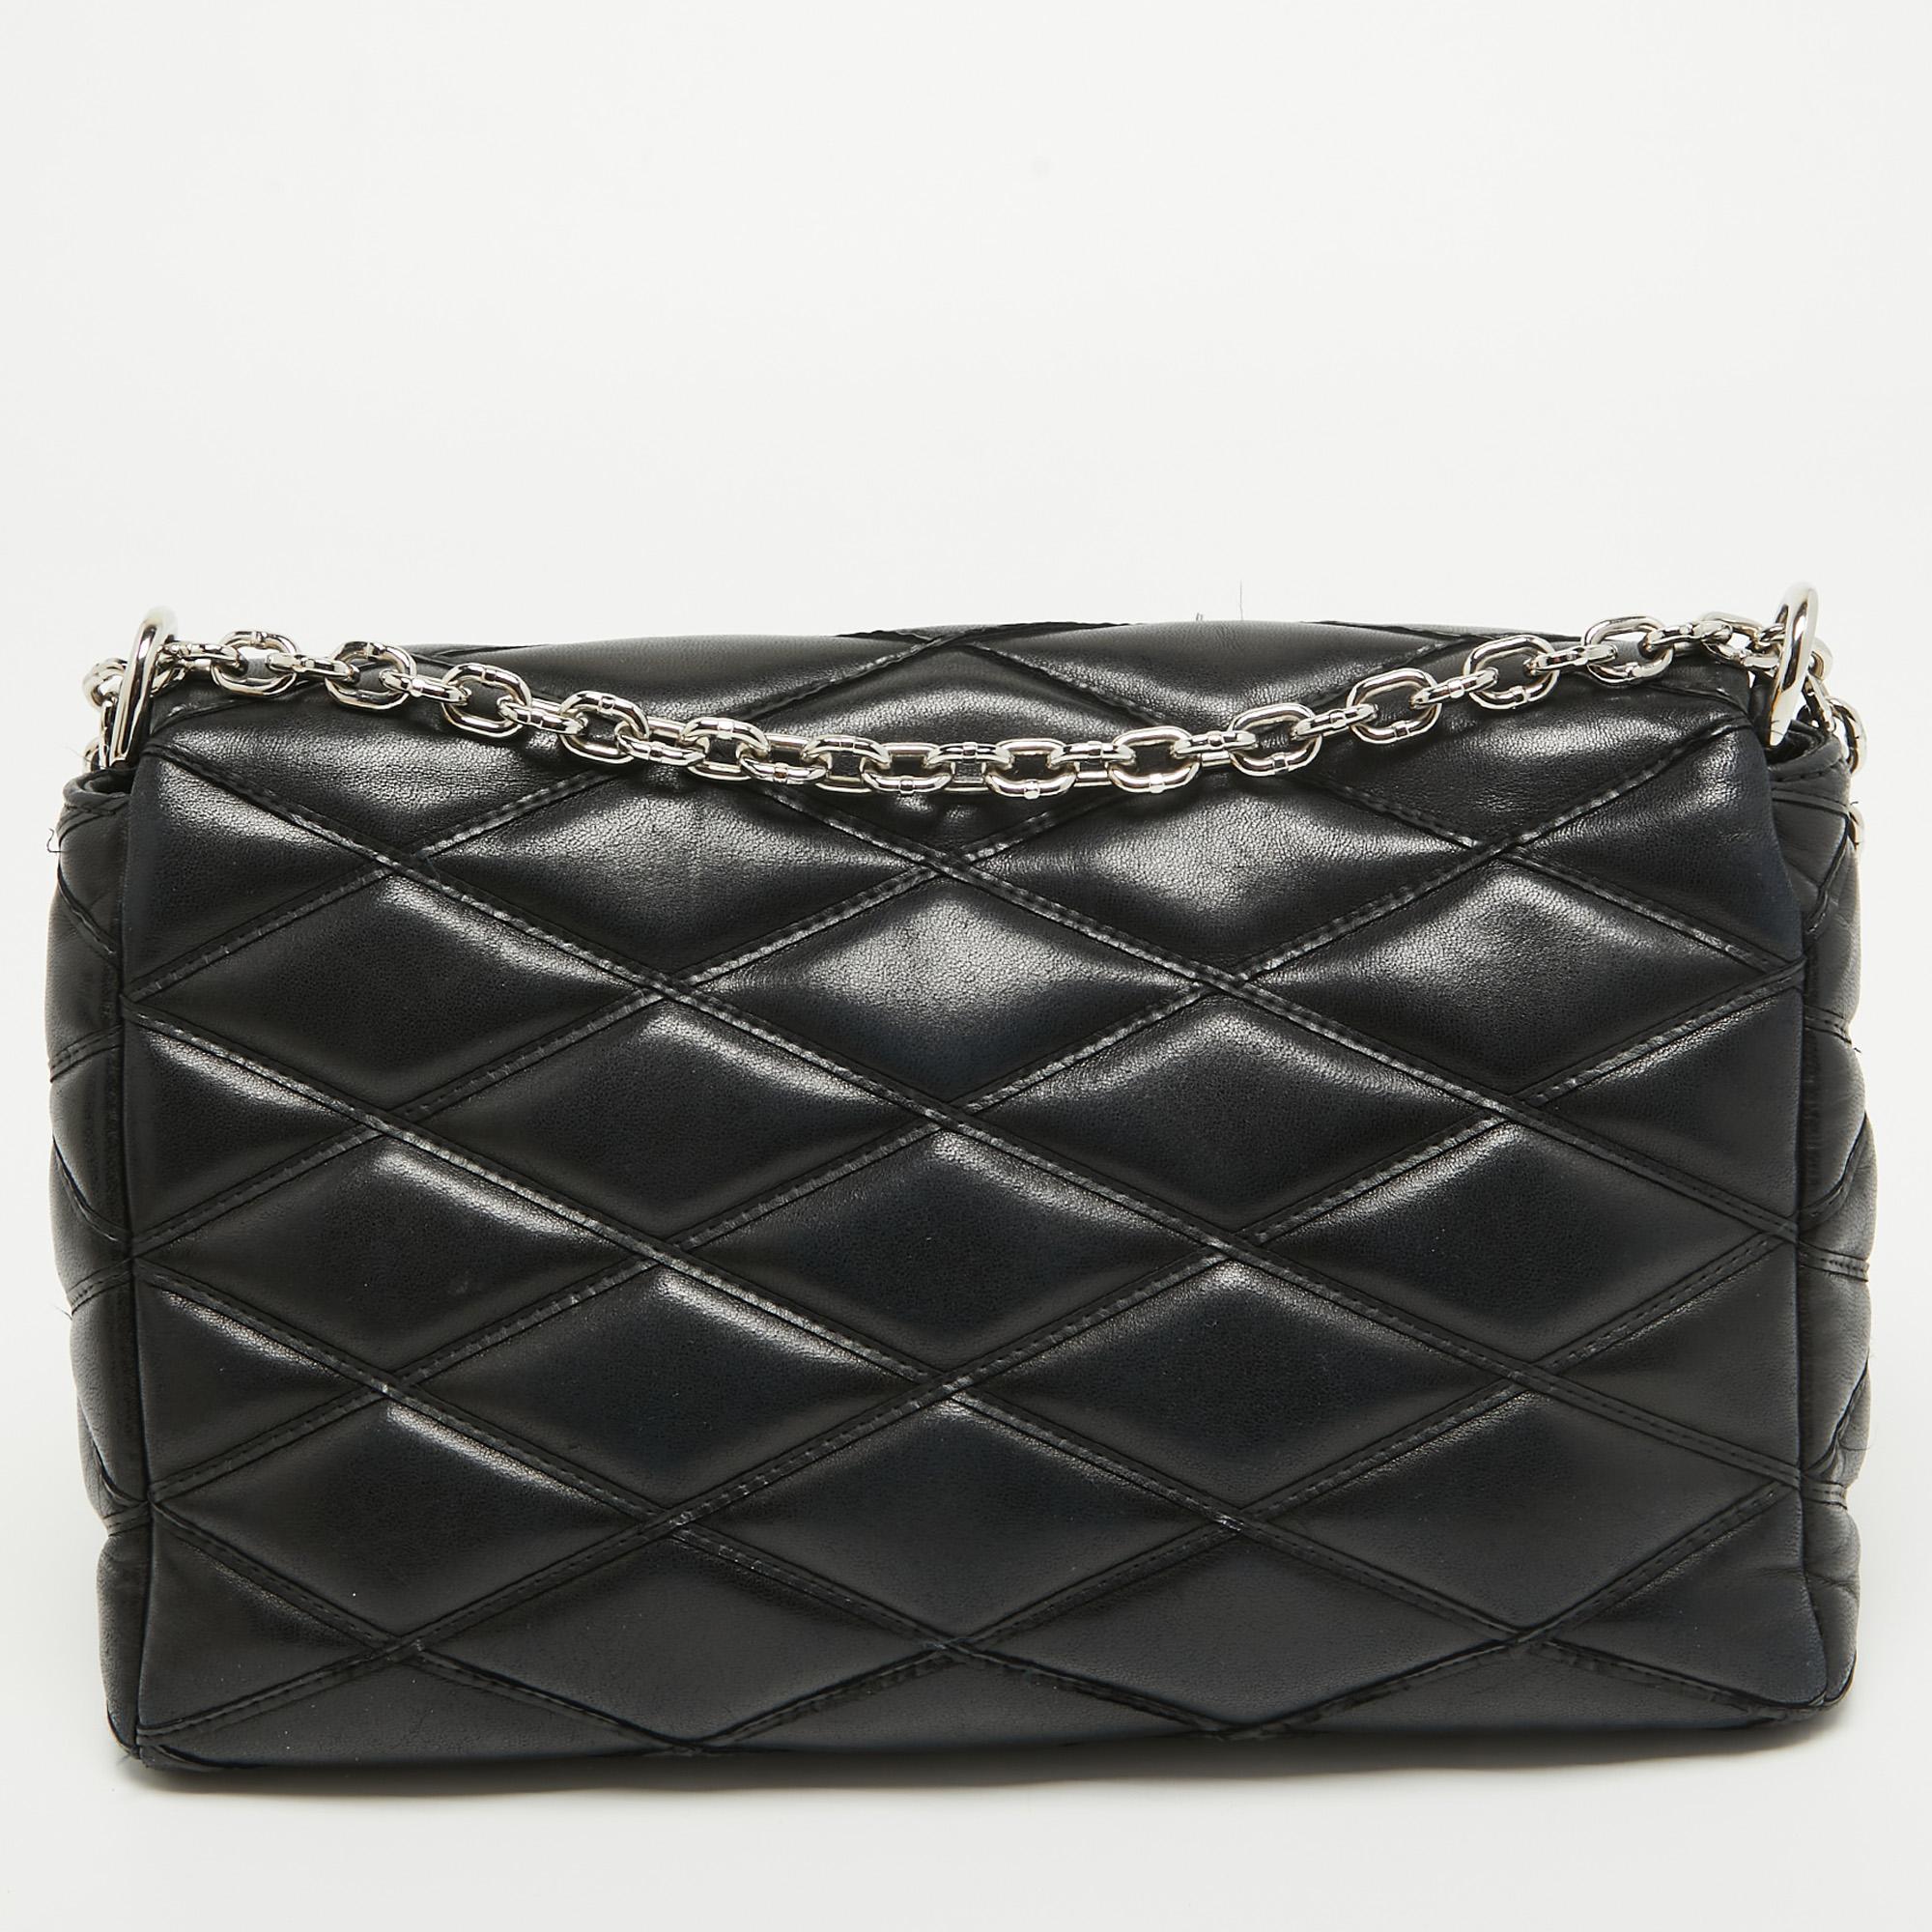 Louis Vuitton Black Quilted Leather GO-14 Malletage MM Bag In Good Condition For Sale In Dubai, Al Qouz 2